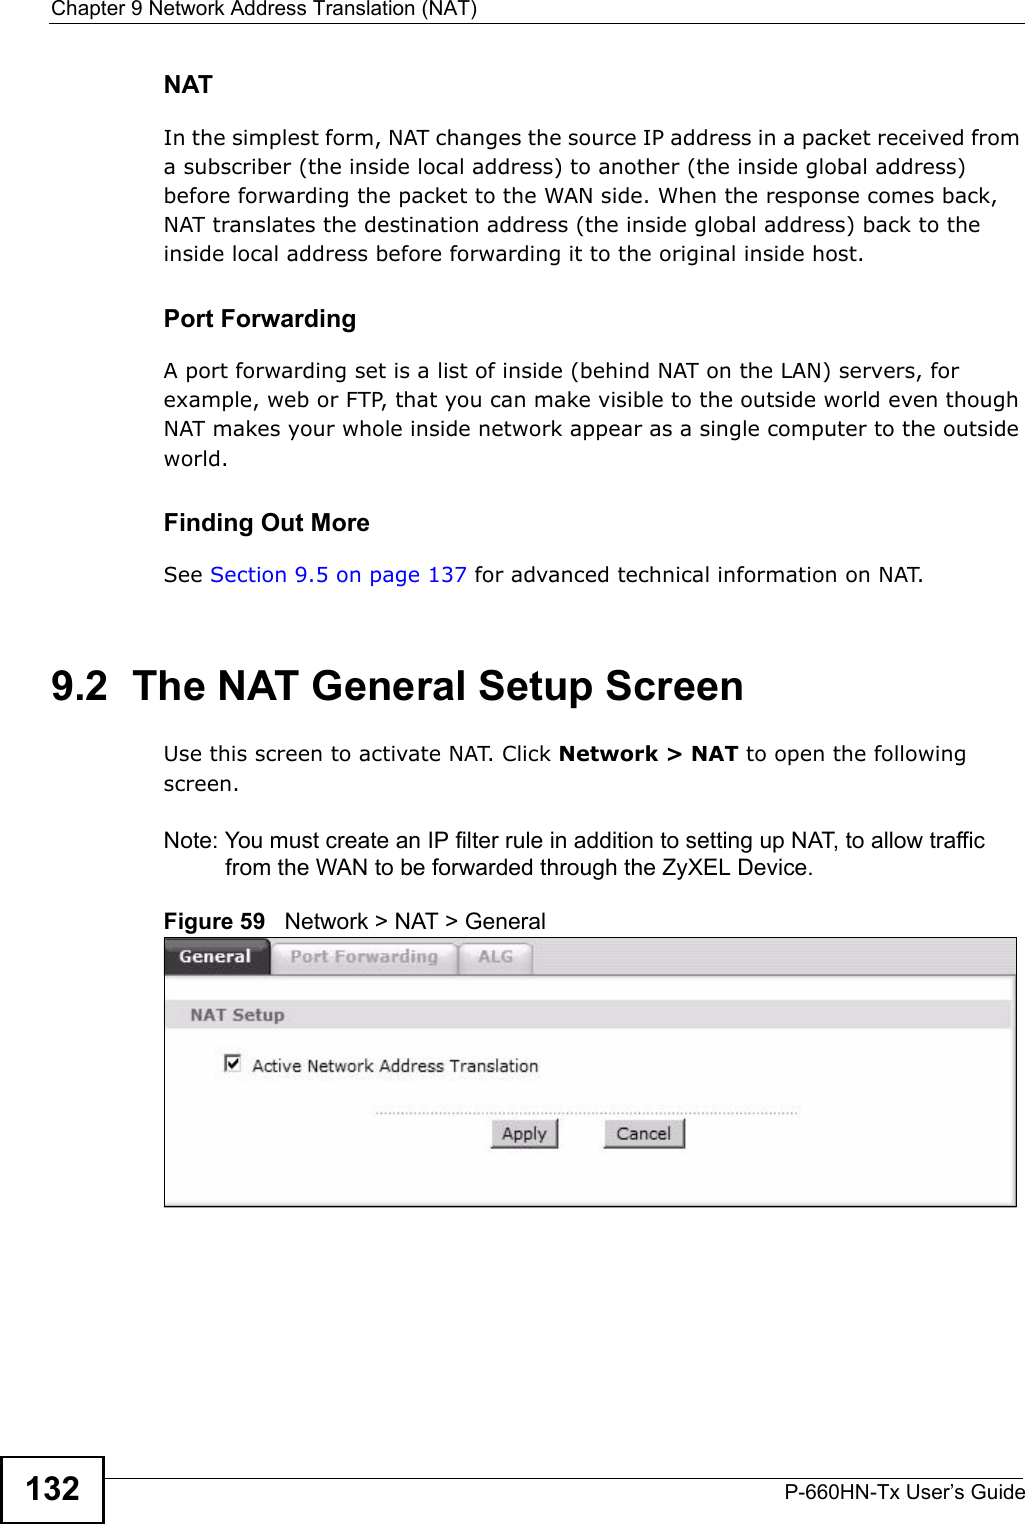 Chapter 9 Network Address Translation (NAT)P-660HN-Tx User’s Guide132NATIn the simplest form, NAT changes the source IP address in a packet received from a subscriber (the inside local address) to another (the inside global address) before forwarding the packet to the WAN side. When the response comes back, NAT translates the destination address (the inside global address) back to the inside local address before forwarding it to the original inside host.Port ForwardingA port forwarding set is a list of inside (behind NAT on the LAN) servers, for example, web or FTP, that you can make visible to the outside world even though NAT makes your whole inside network appear as a single computer to the outside world.Finding Out MoreSee Section 9.5 on page 137 for advanced technical information on NAT.9.2  The NAT General Setup ScreenUse this screen to activate NAT. Click Network &gt; NAT to open the following screen.Note: You must create an IP filter rule in addition to setting up NAT, to allow traffic from the WAN to be forwarded through the ZyXEL Device.Figure 59   Network &gt; NAT &gt; General